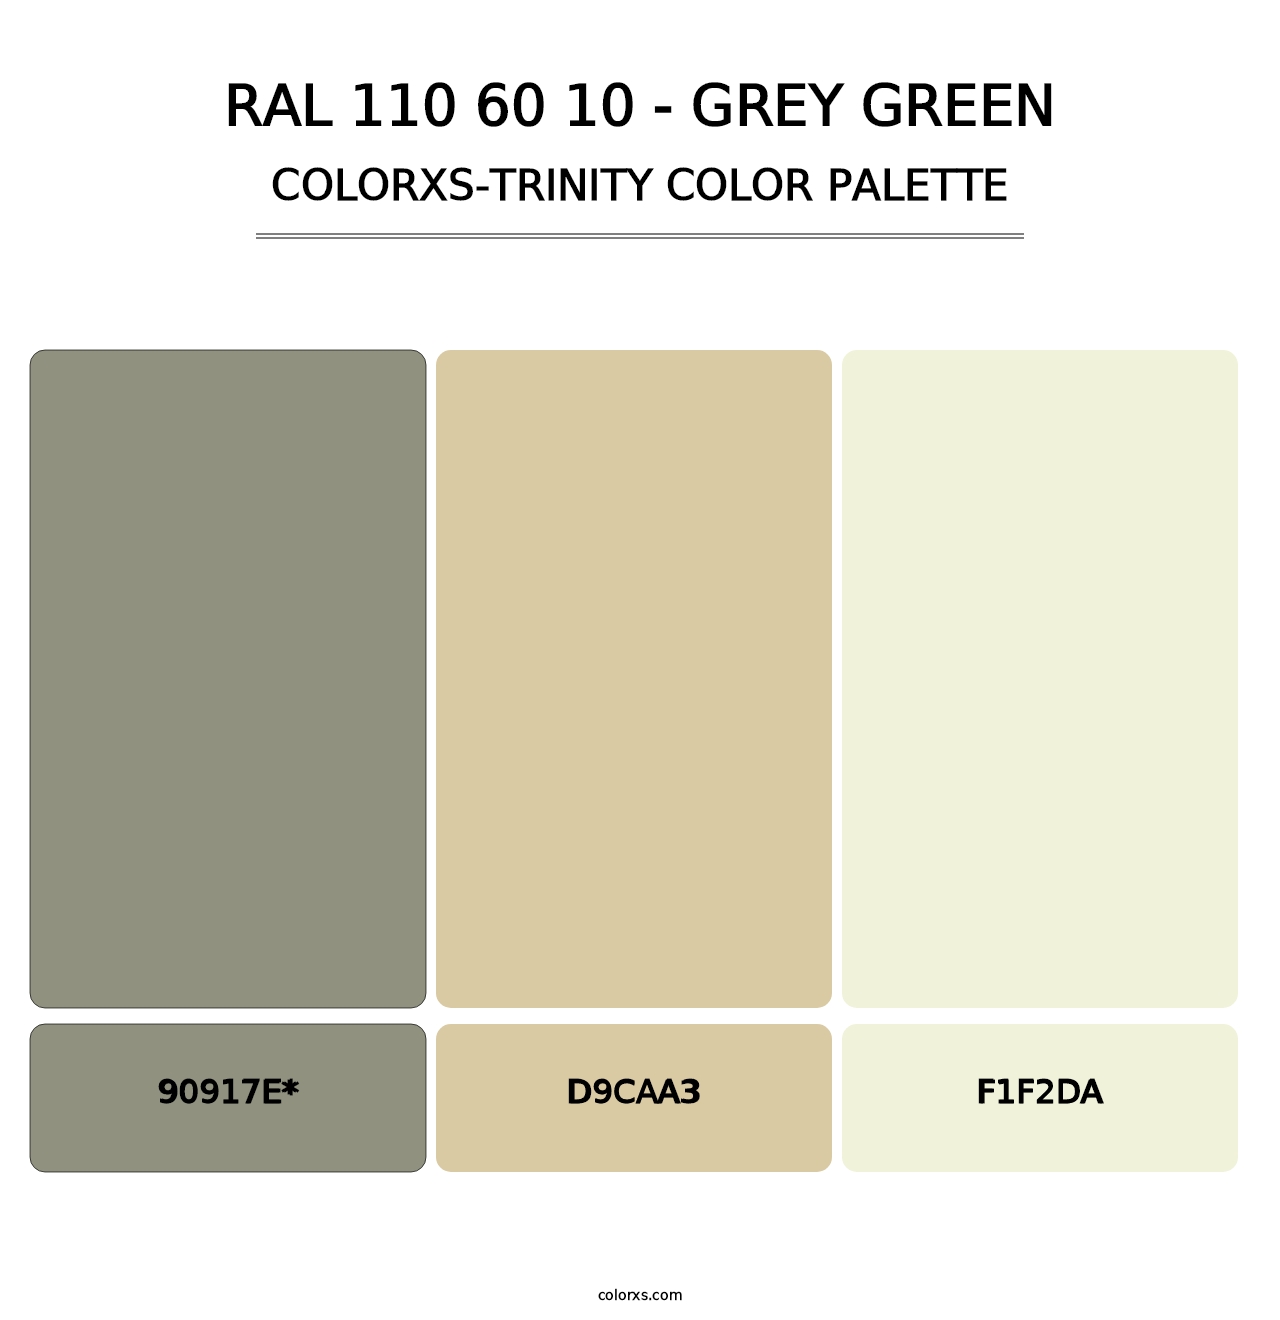 RAL 110 60 10 - Grey Green - Colorxs Trinity Palette